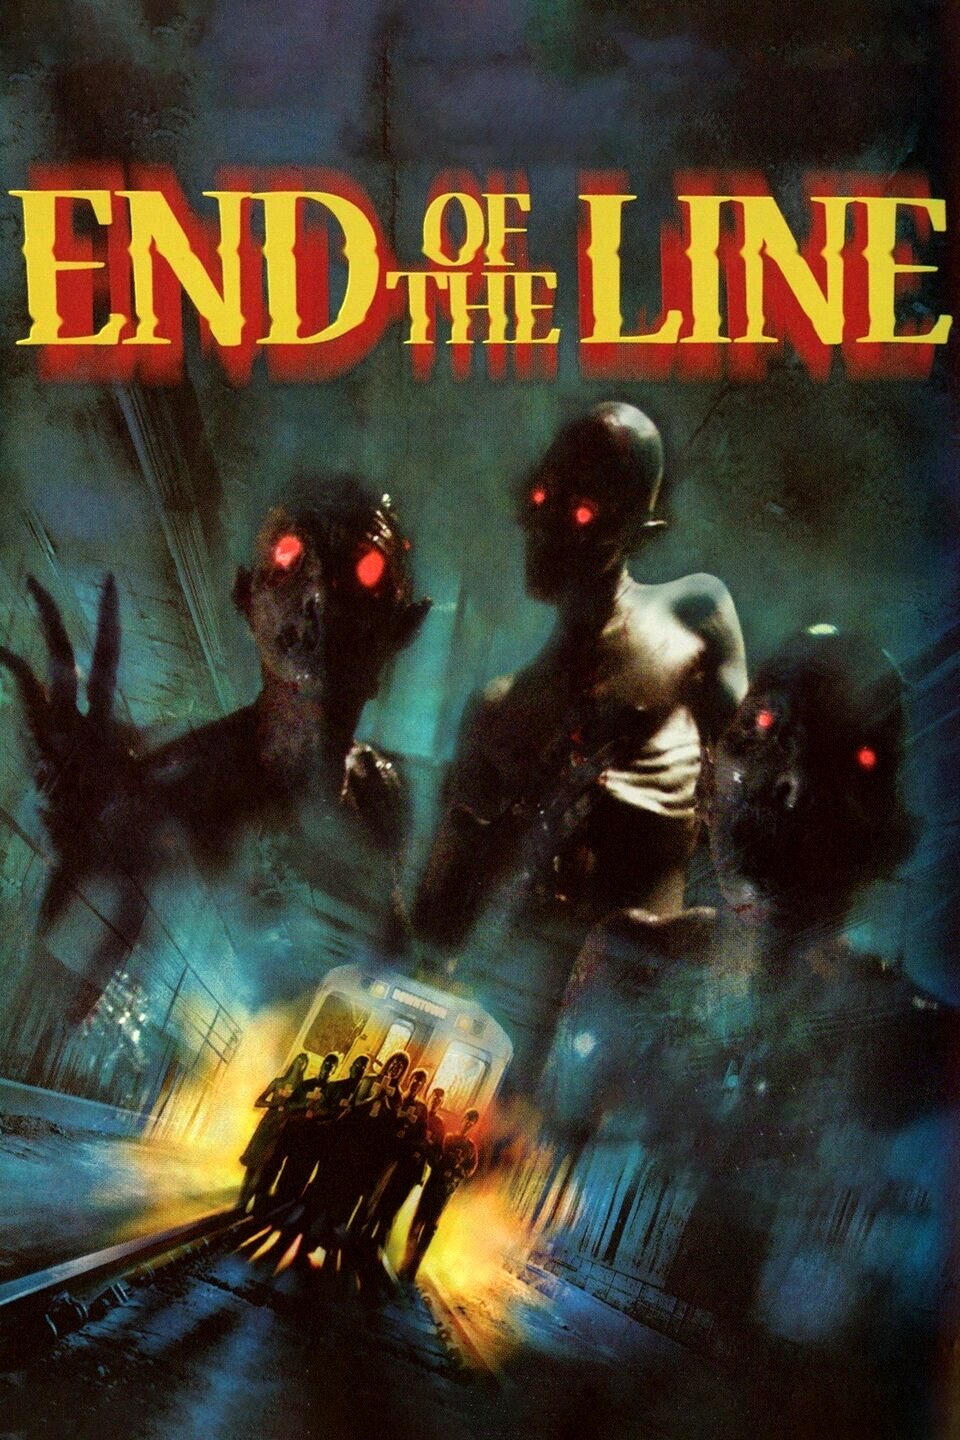 End of the line [Sub-ITA] (2007)